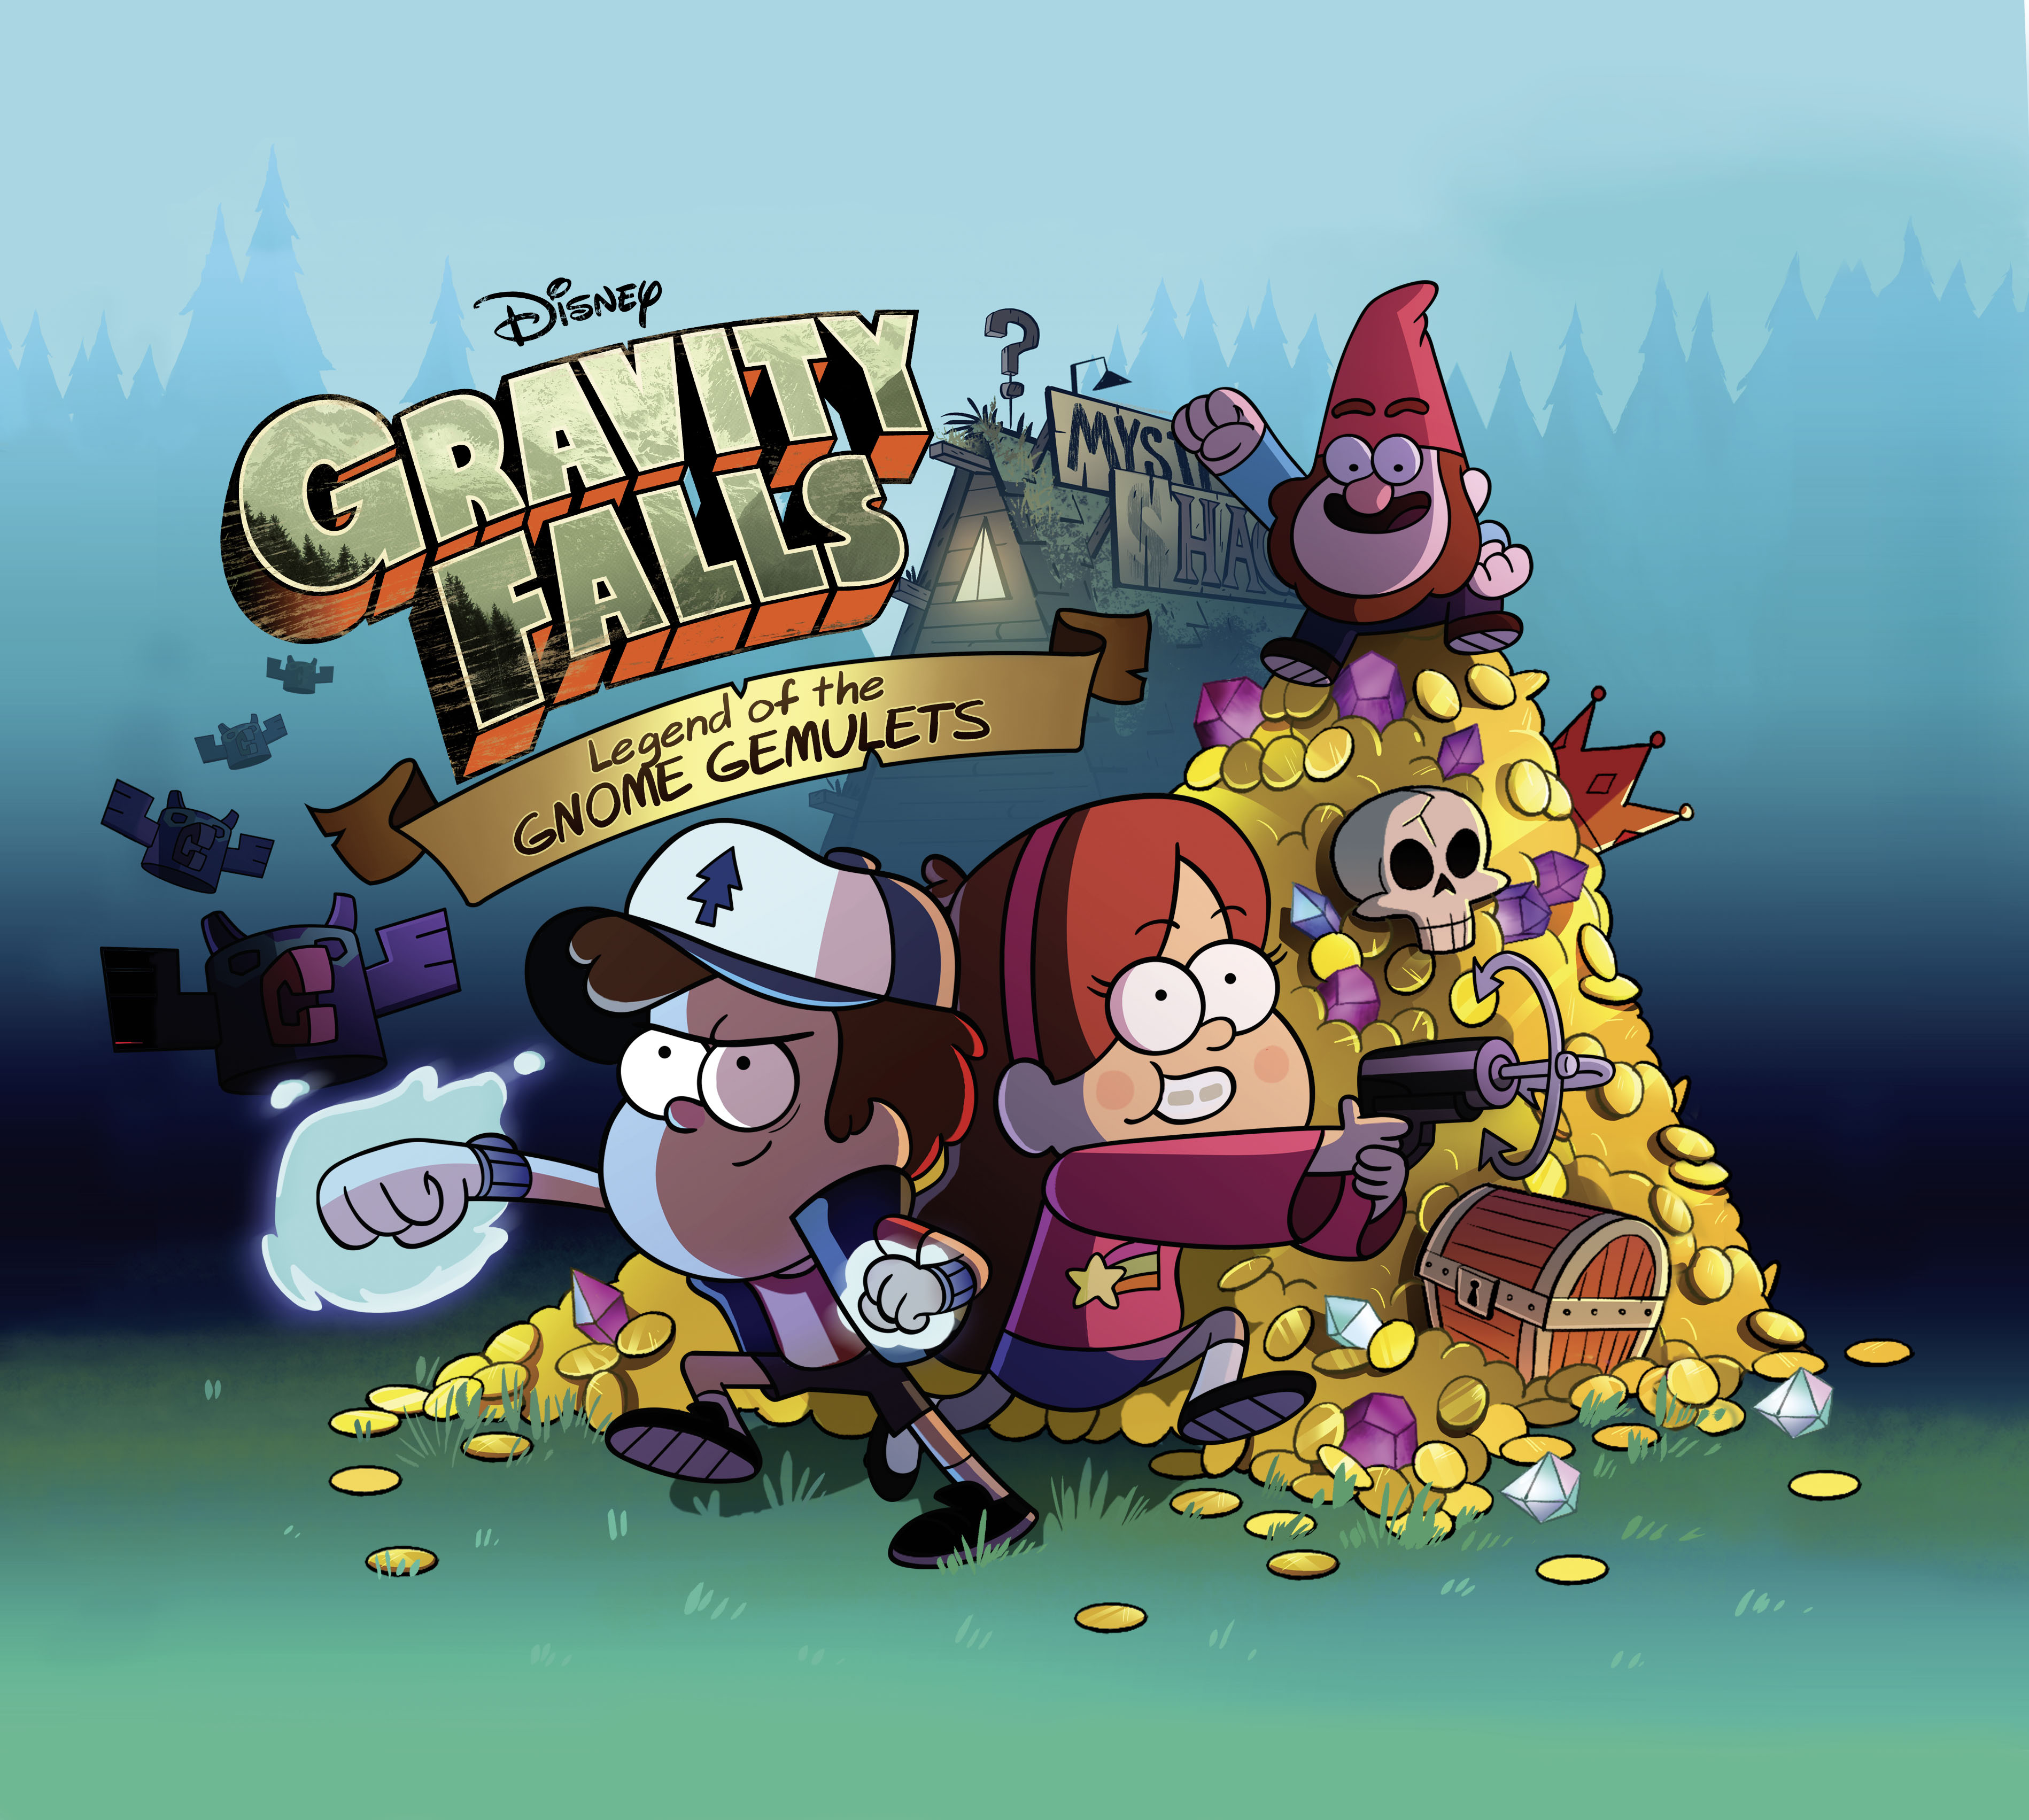 Gravity Falls: Legend of the Gnome Gemulets Announced for Nintendo 3DS Handheld Systems